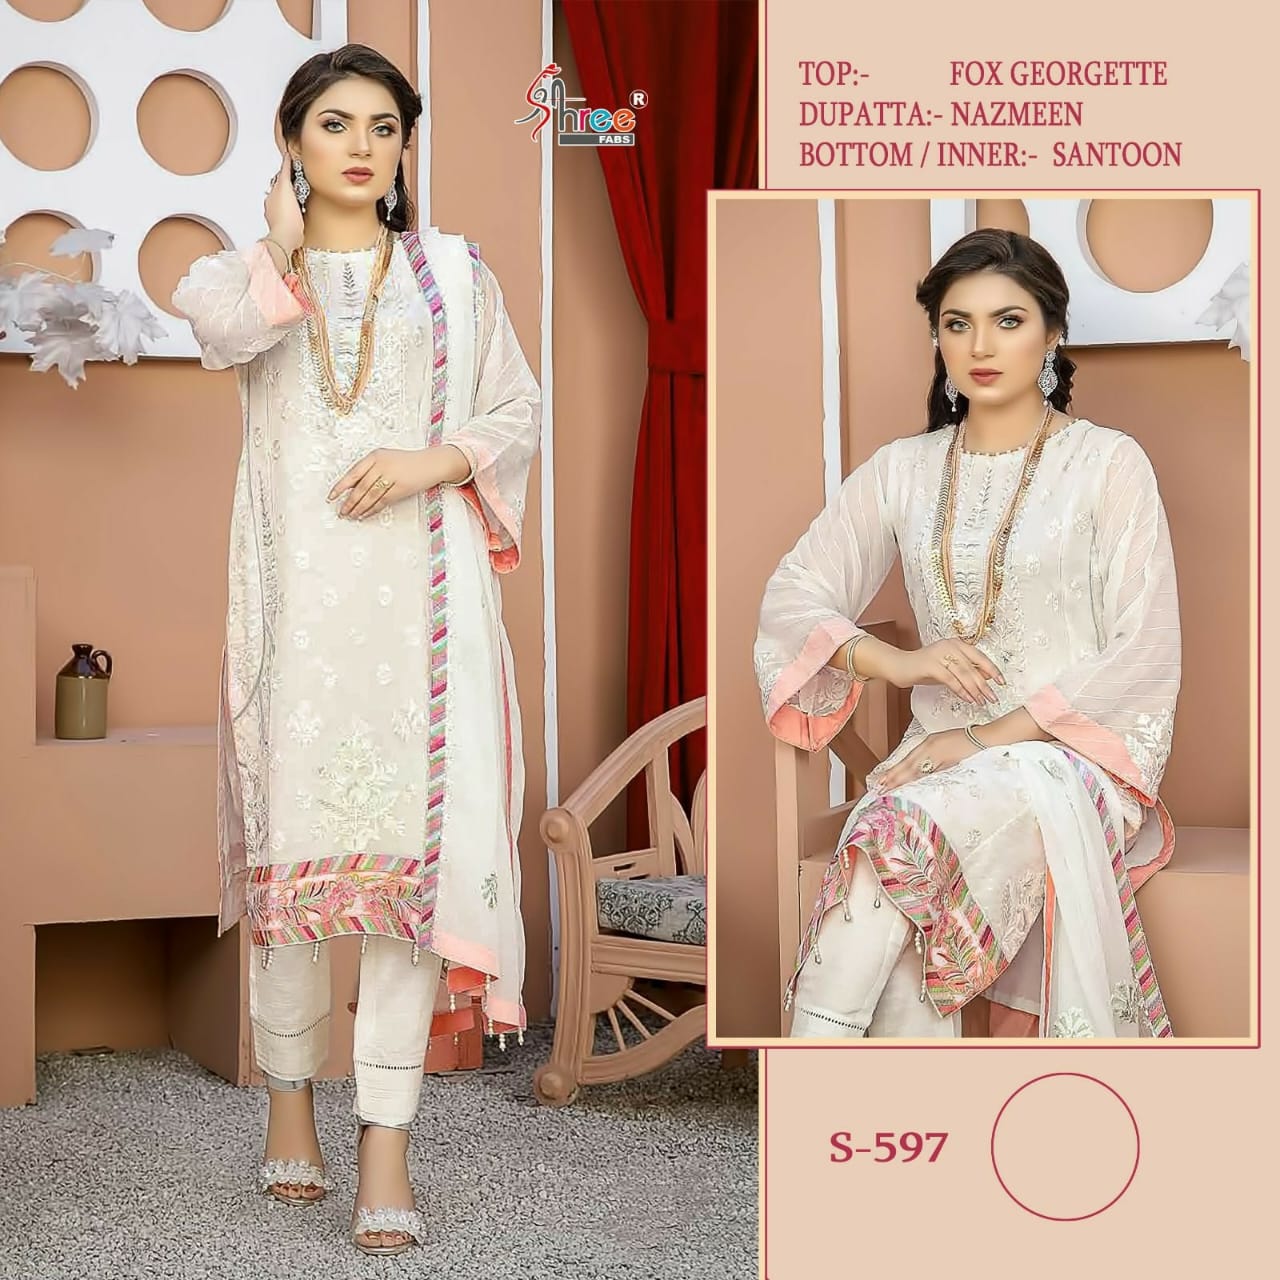 SHREE FABS S 597 PAKISTANI SUITS IN INDIA